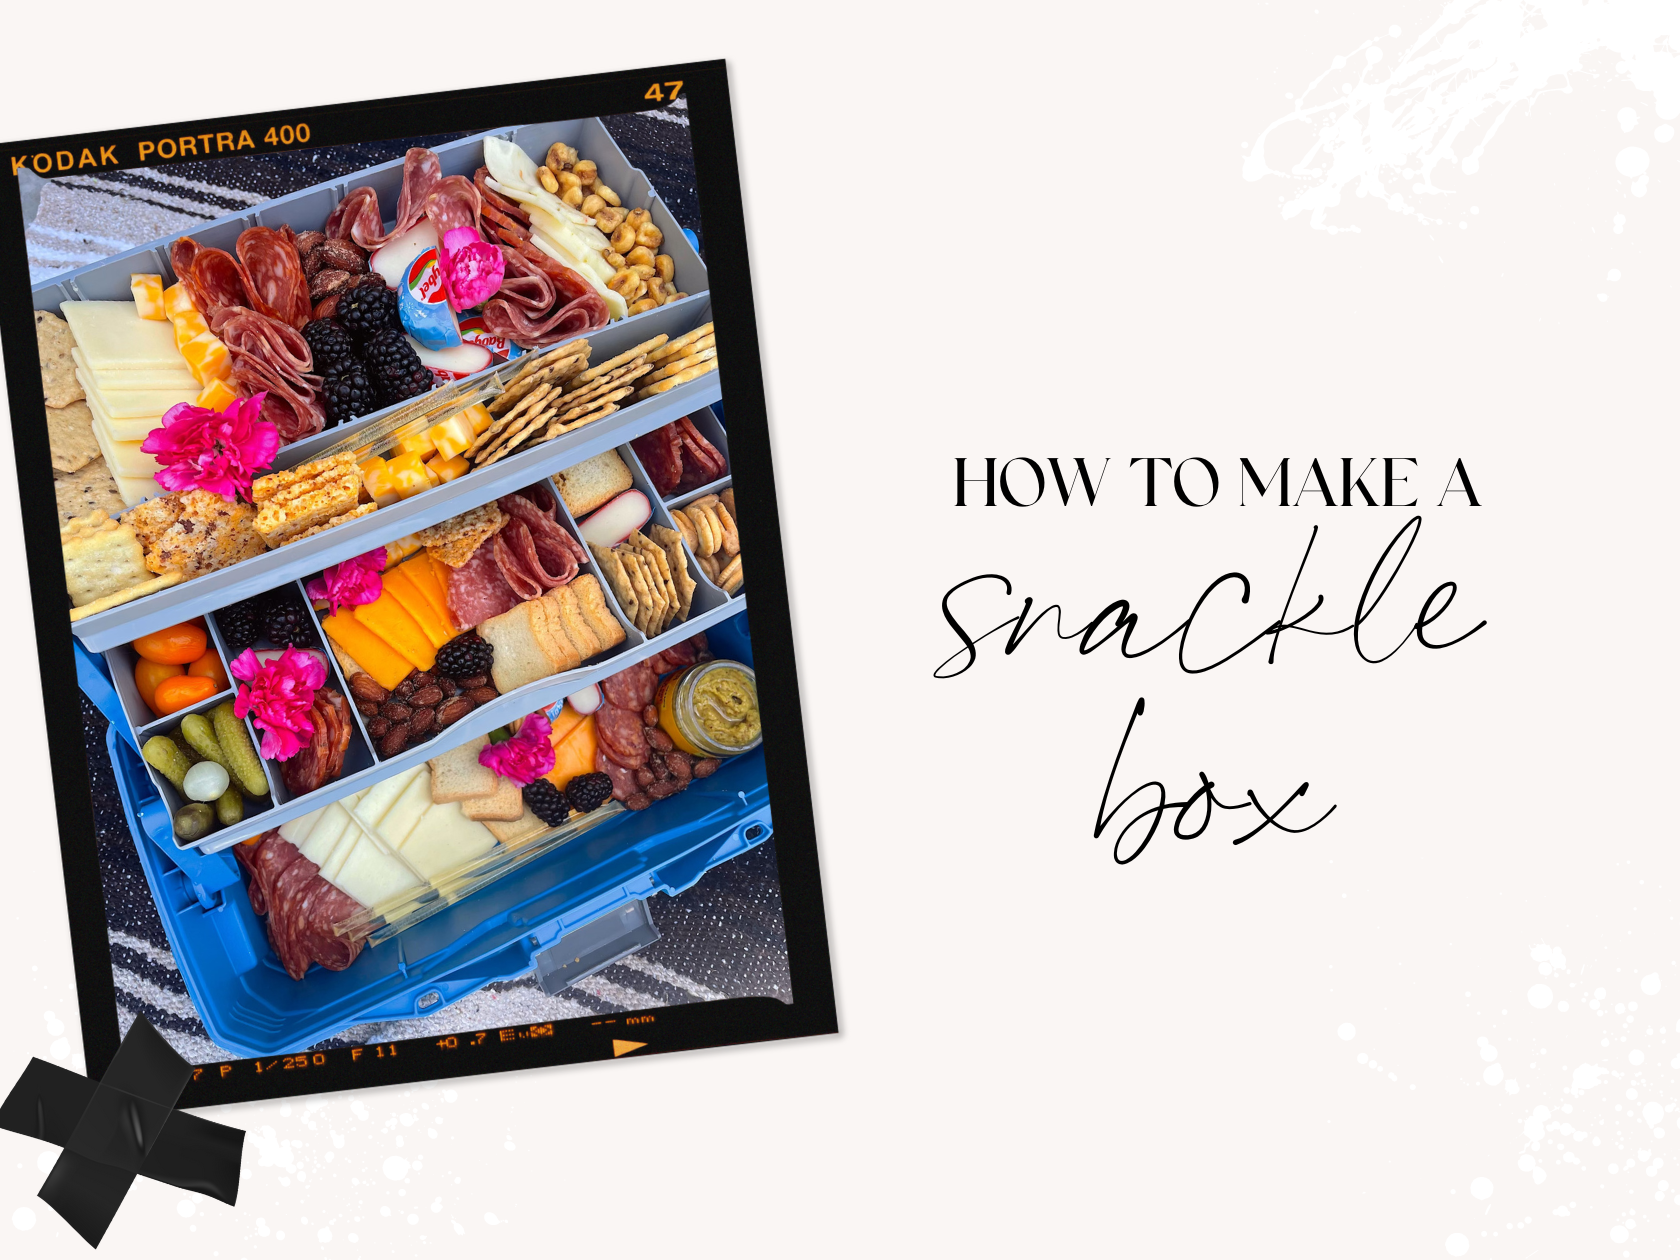 Click now to browse Snackle Box - On The Go Charcuterie/Snack Box